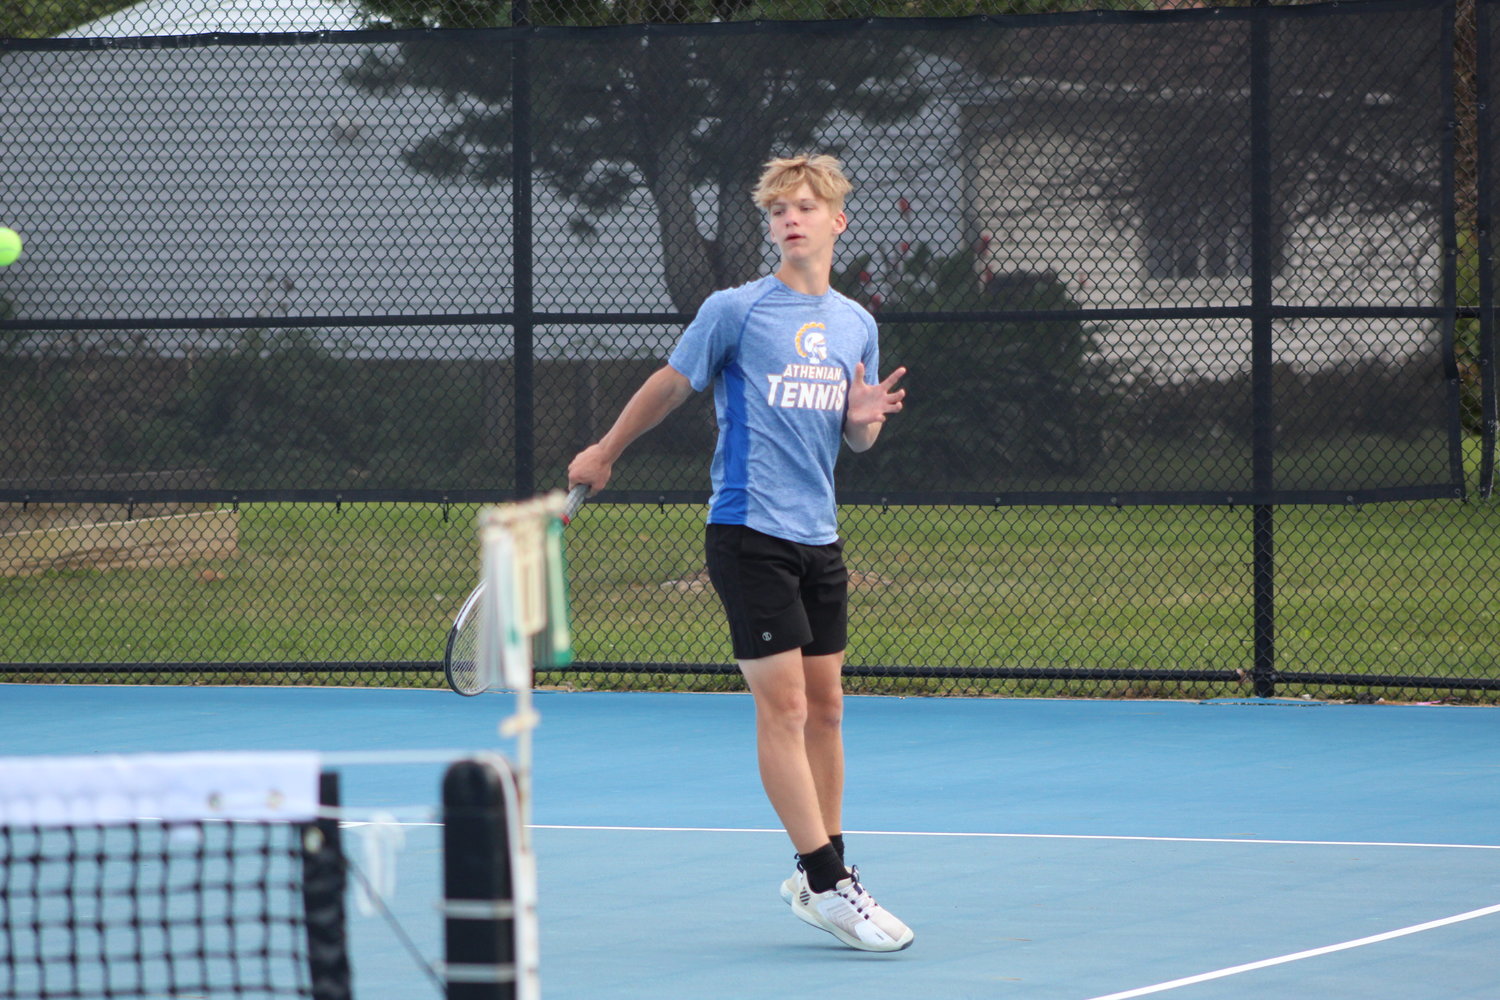 Rowan Gambrel is just a freshman yet has held his own nicely at the three singles spot for CHS.